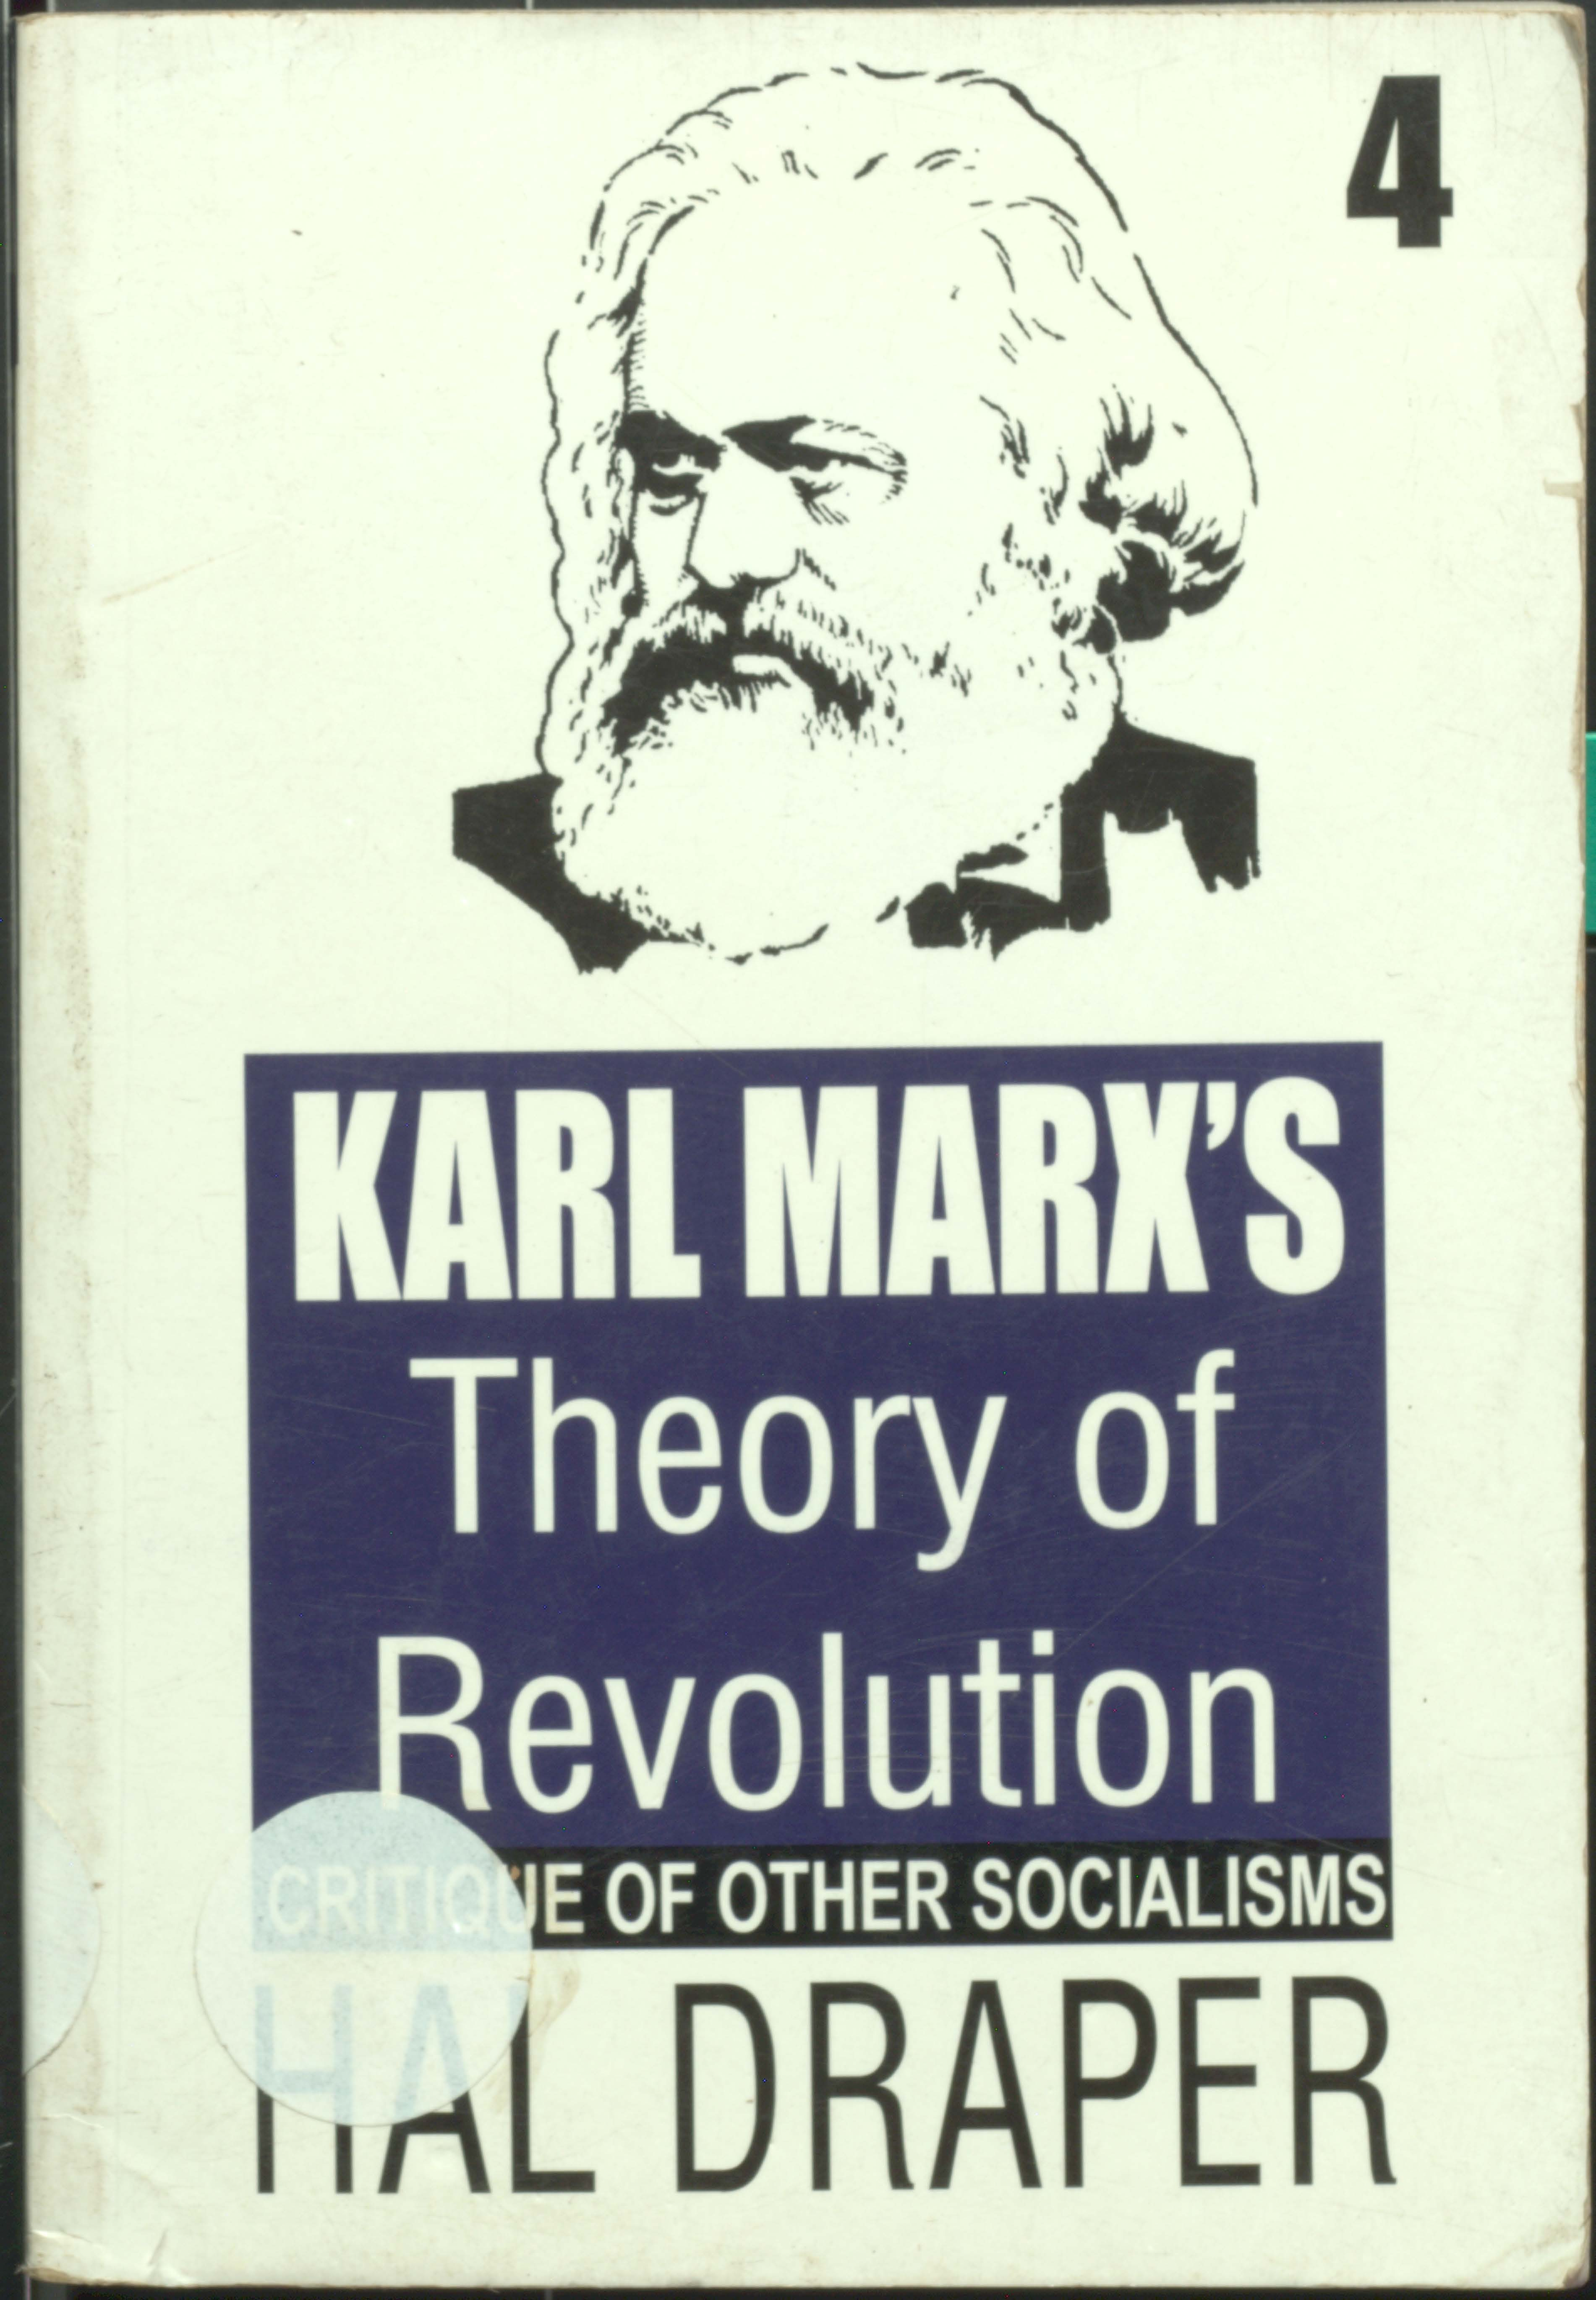 KARL MARX'S THEORY OF REVOLUTION volume-4(critique of other socialisms)